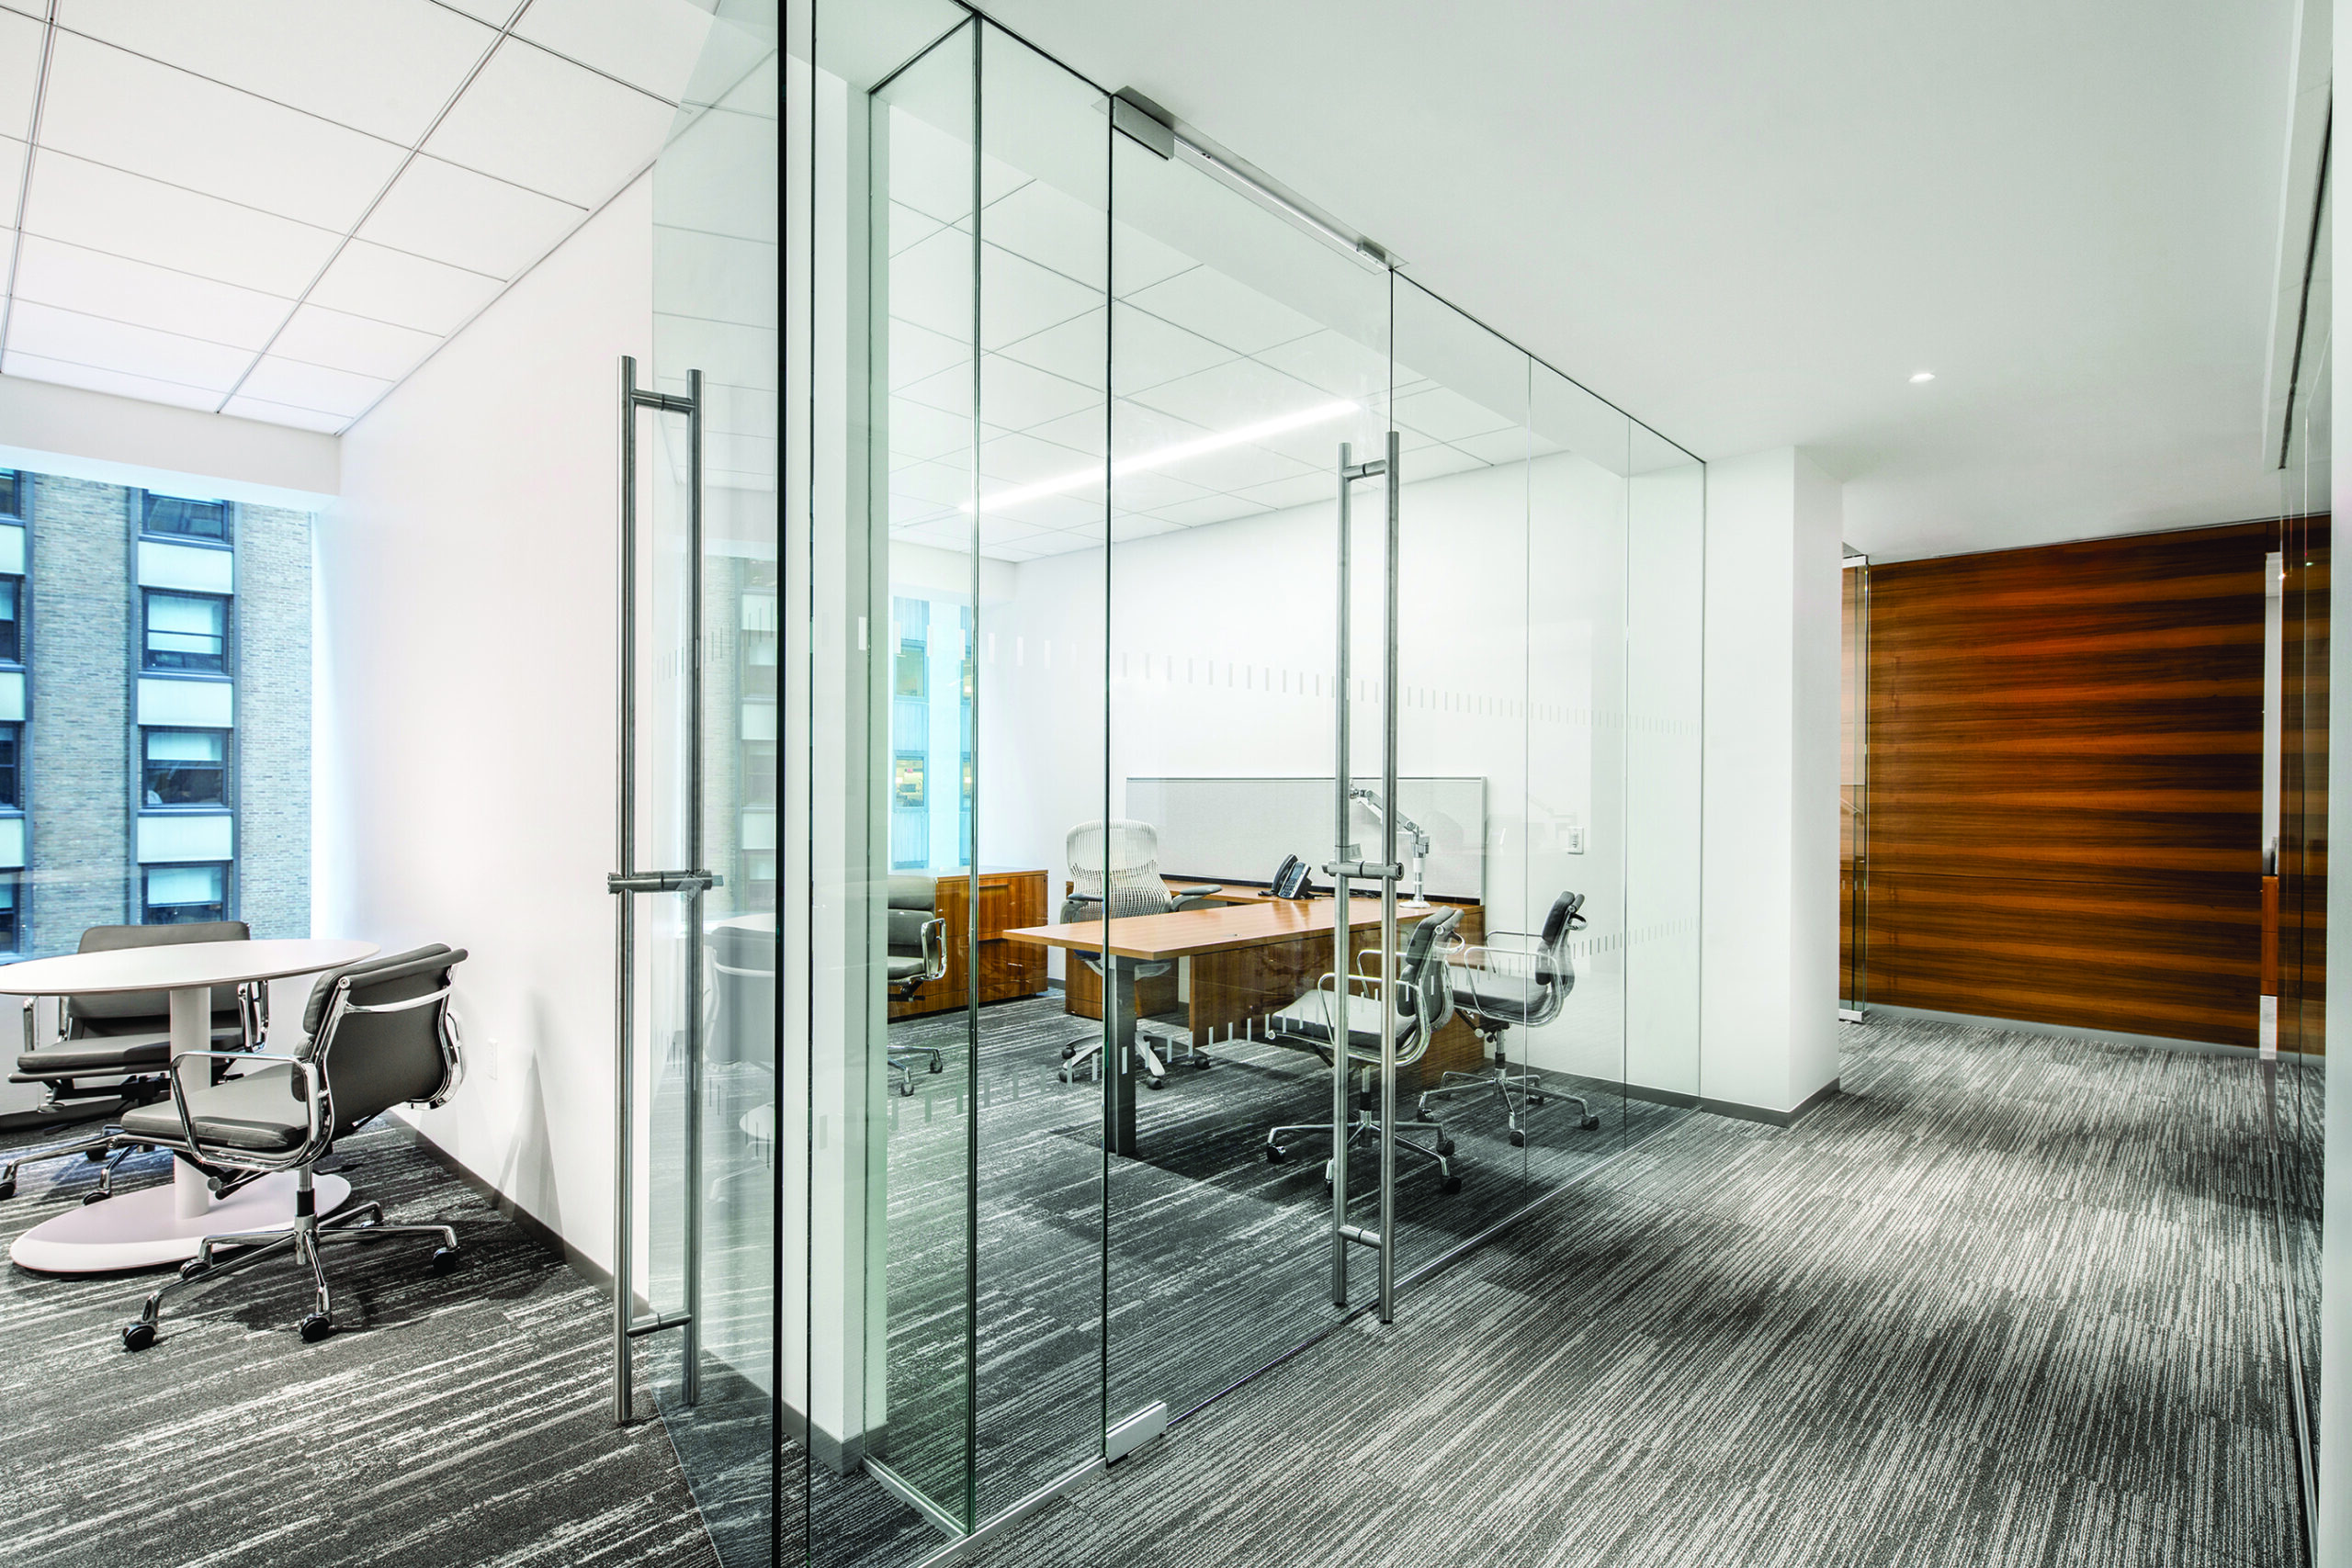 A photo of an architectural building product. An interior detail image, showing a glass wall and doors that open to an office room.